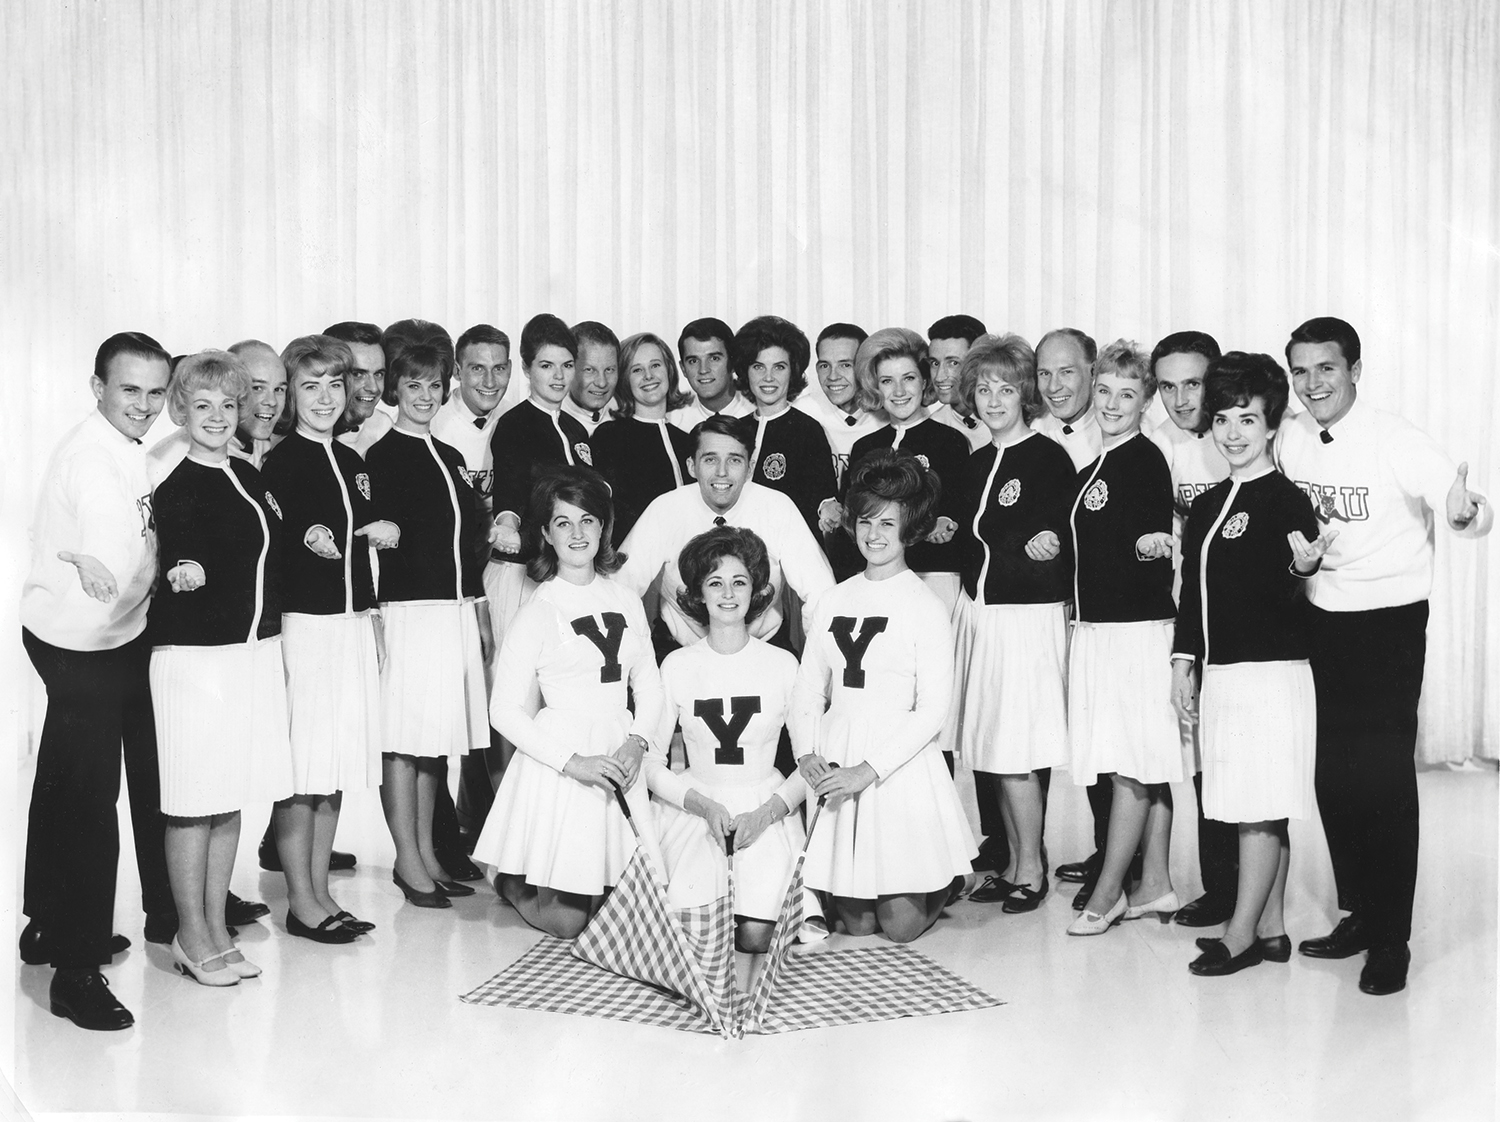 On tour for the U.S. State Department, members of Curtain Time USA, here in 1965, performed for students, dignitaries, and even a king. Photo courtesy BYU Photo